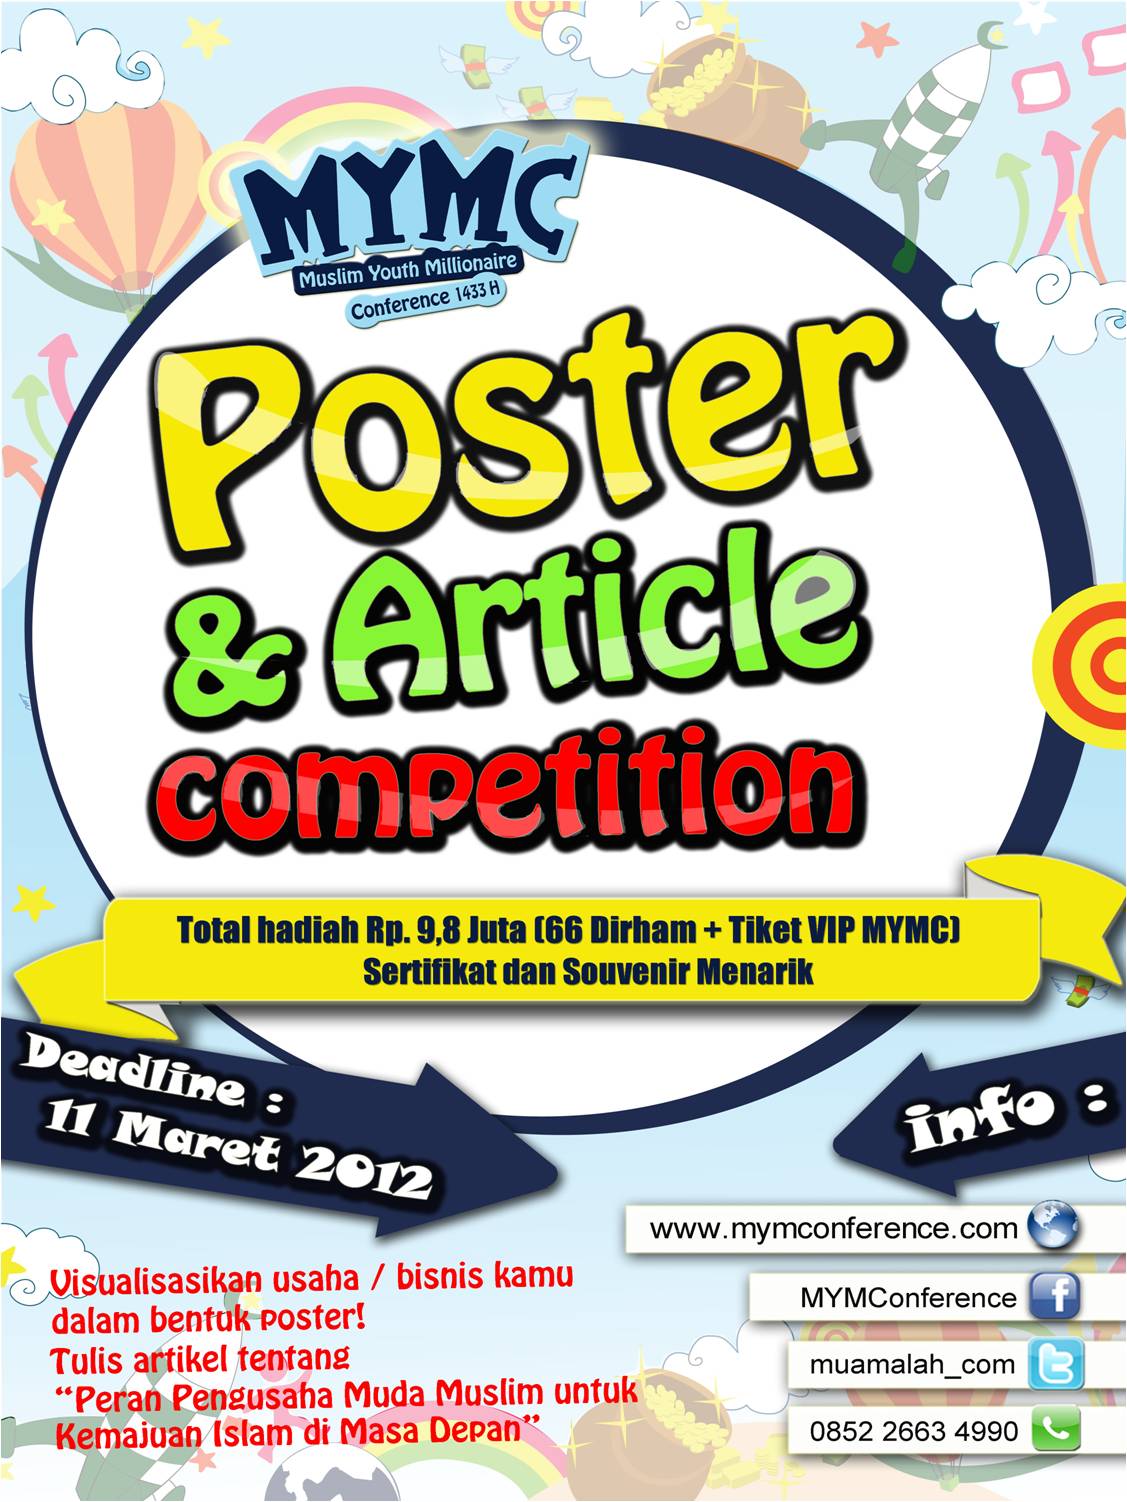 MYMC Poster Competition